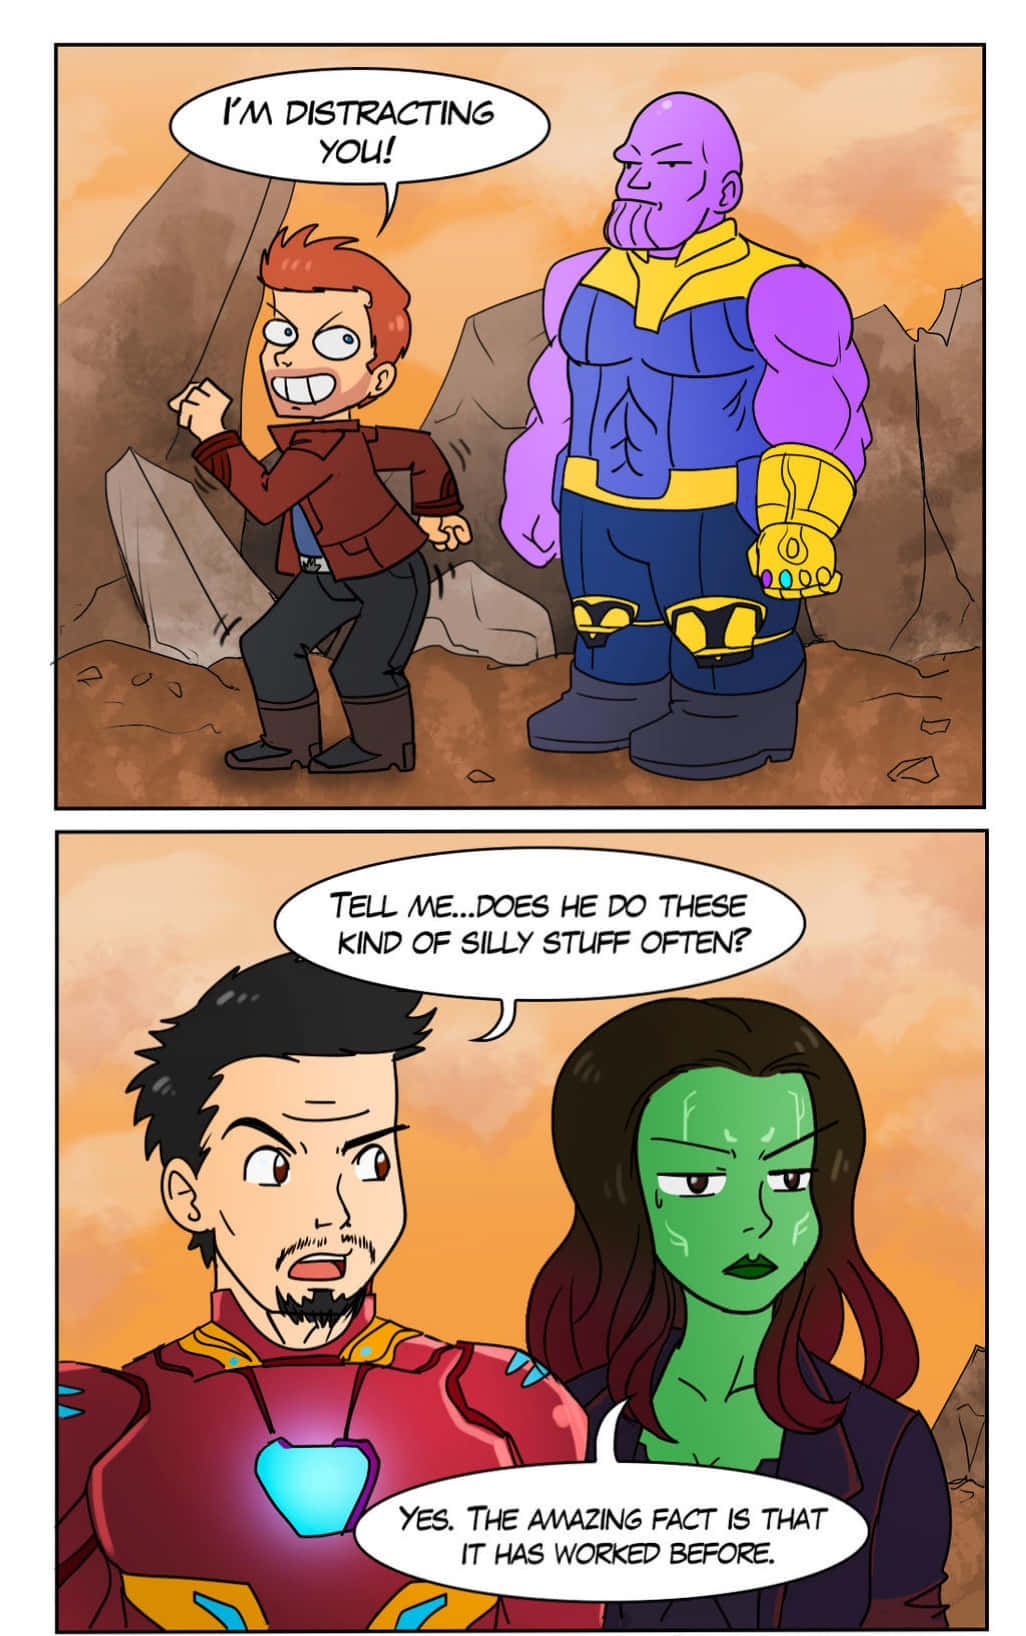 Funny Marvel Comic Strip Distracting Thanos Picture